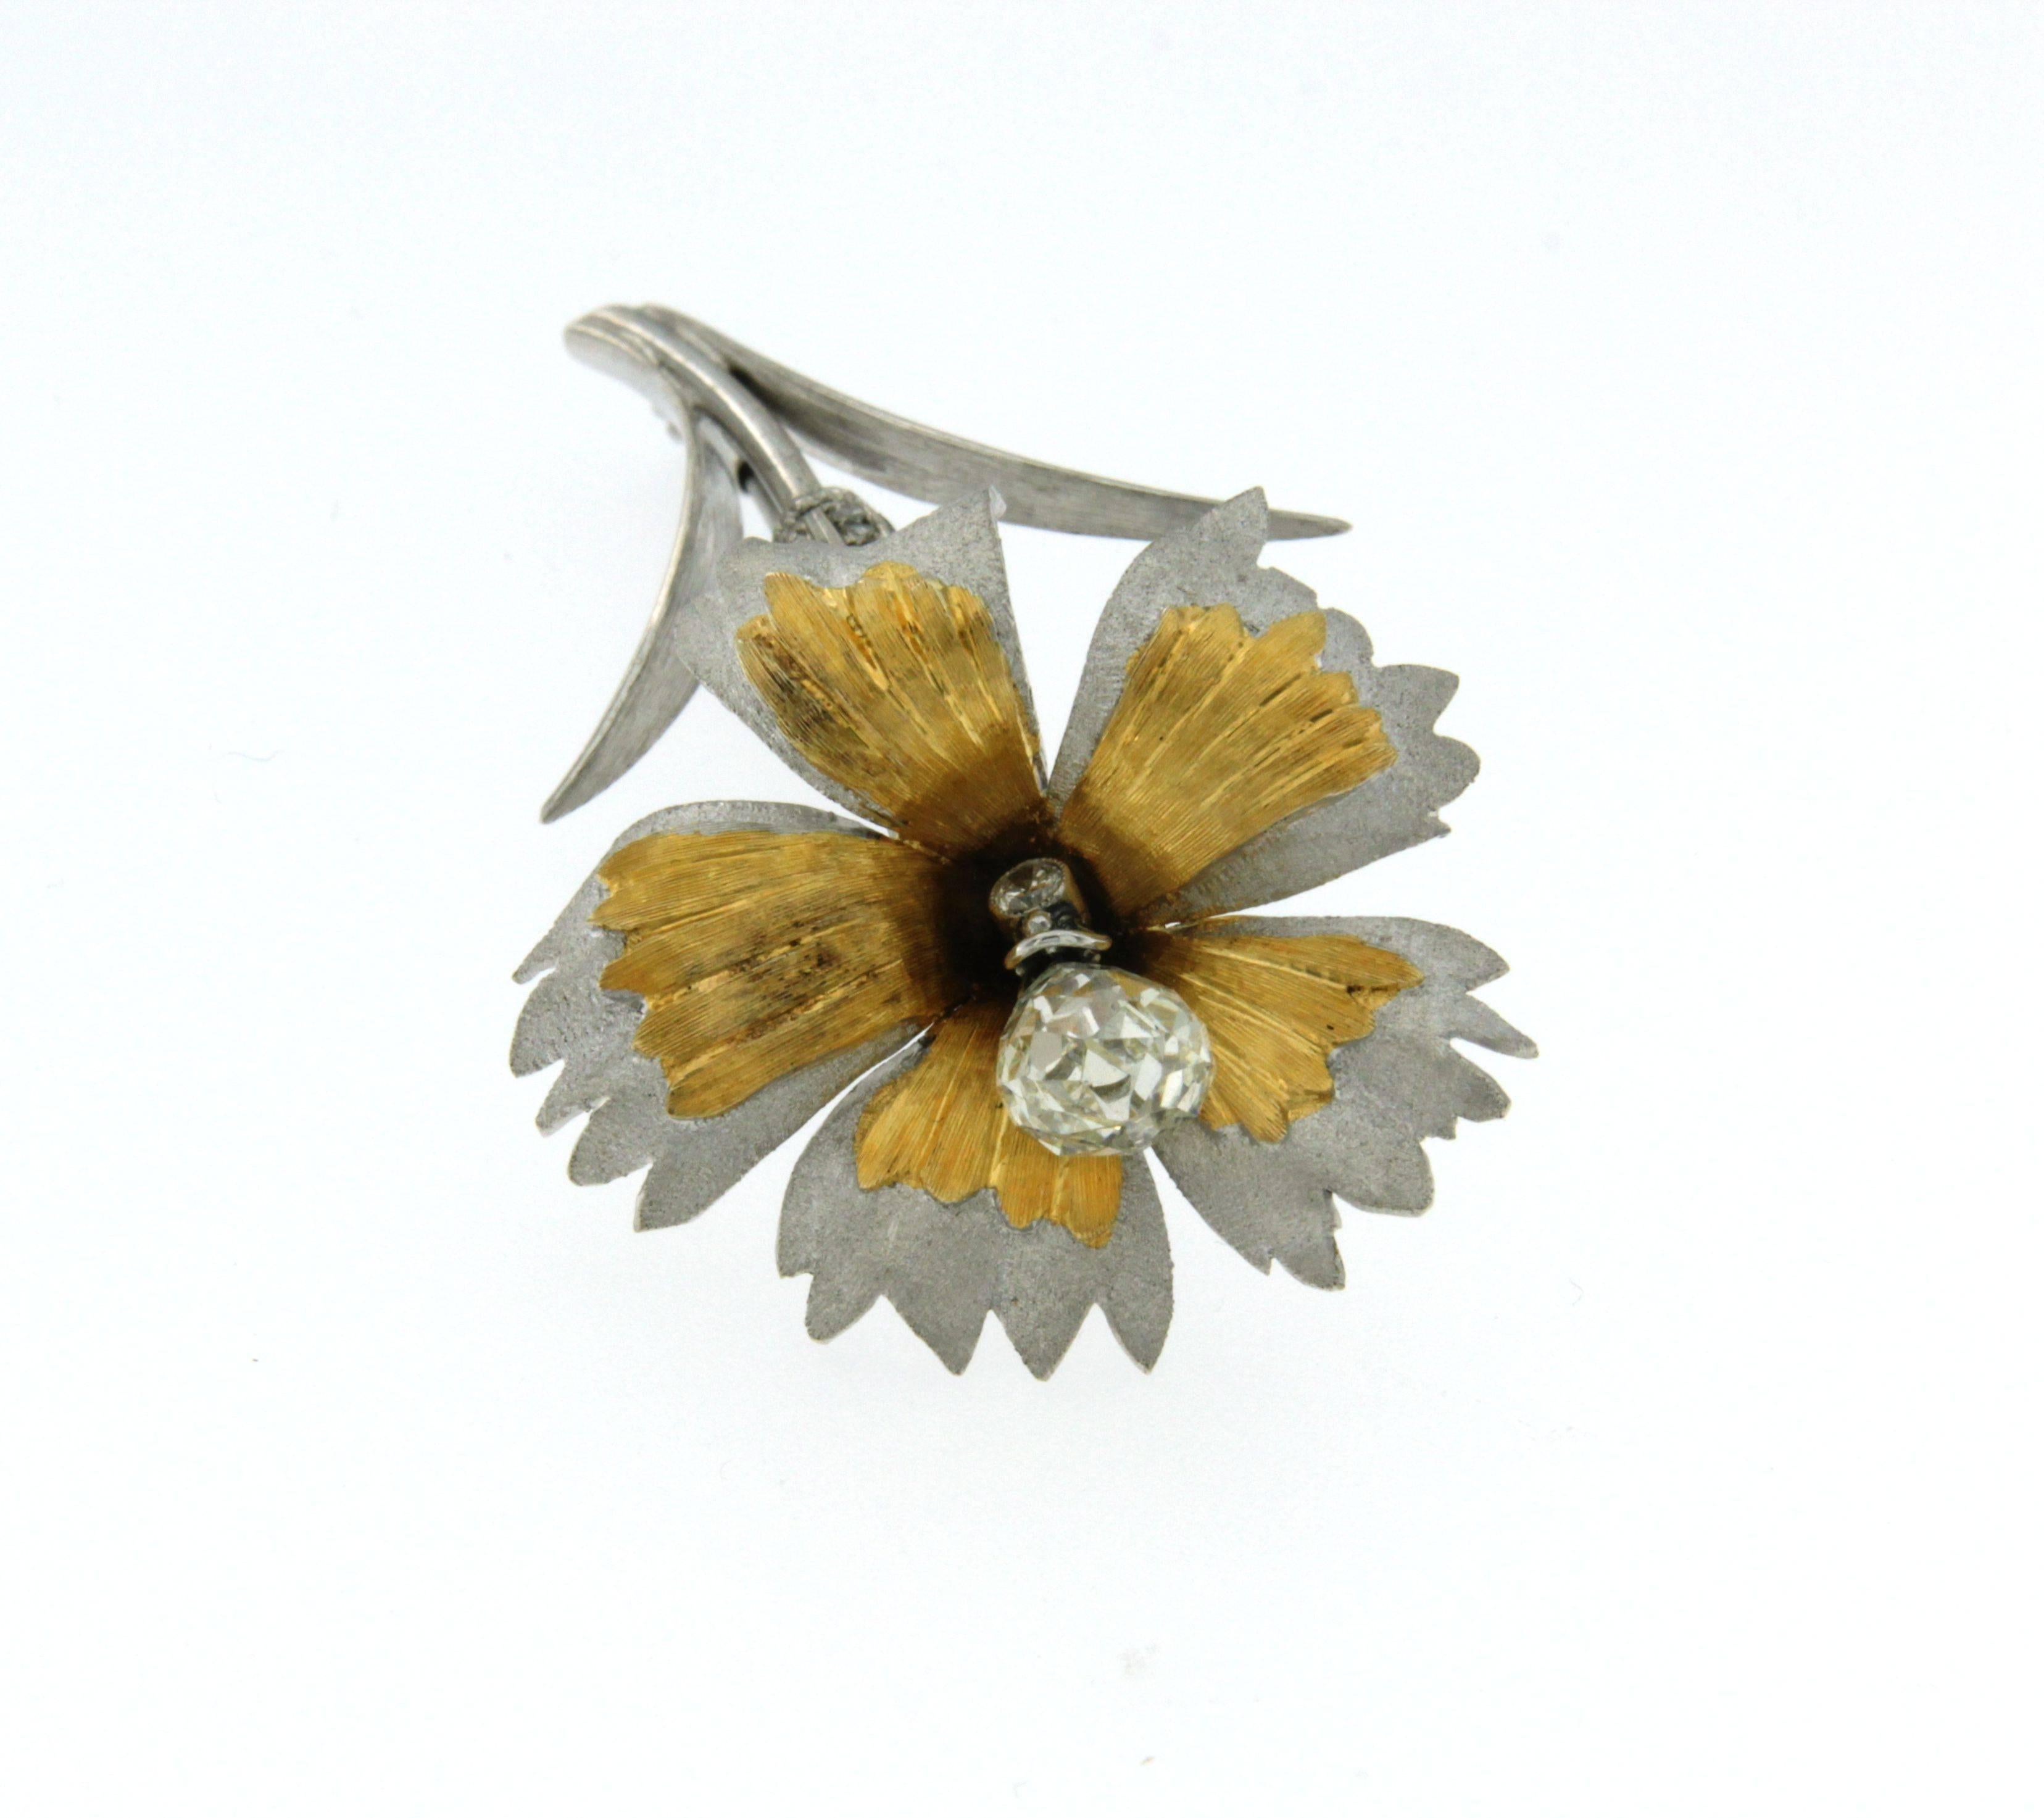 An absolutely stunning floral brooch handcrafted in 18K Yellow and White Gold set with a unique Briolette cut Diamond of 3 carat, graded G Color Vvs1
Same manufacture and age of the very famous old Buccellati
Made in Italy - circa